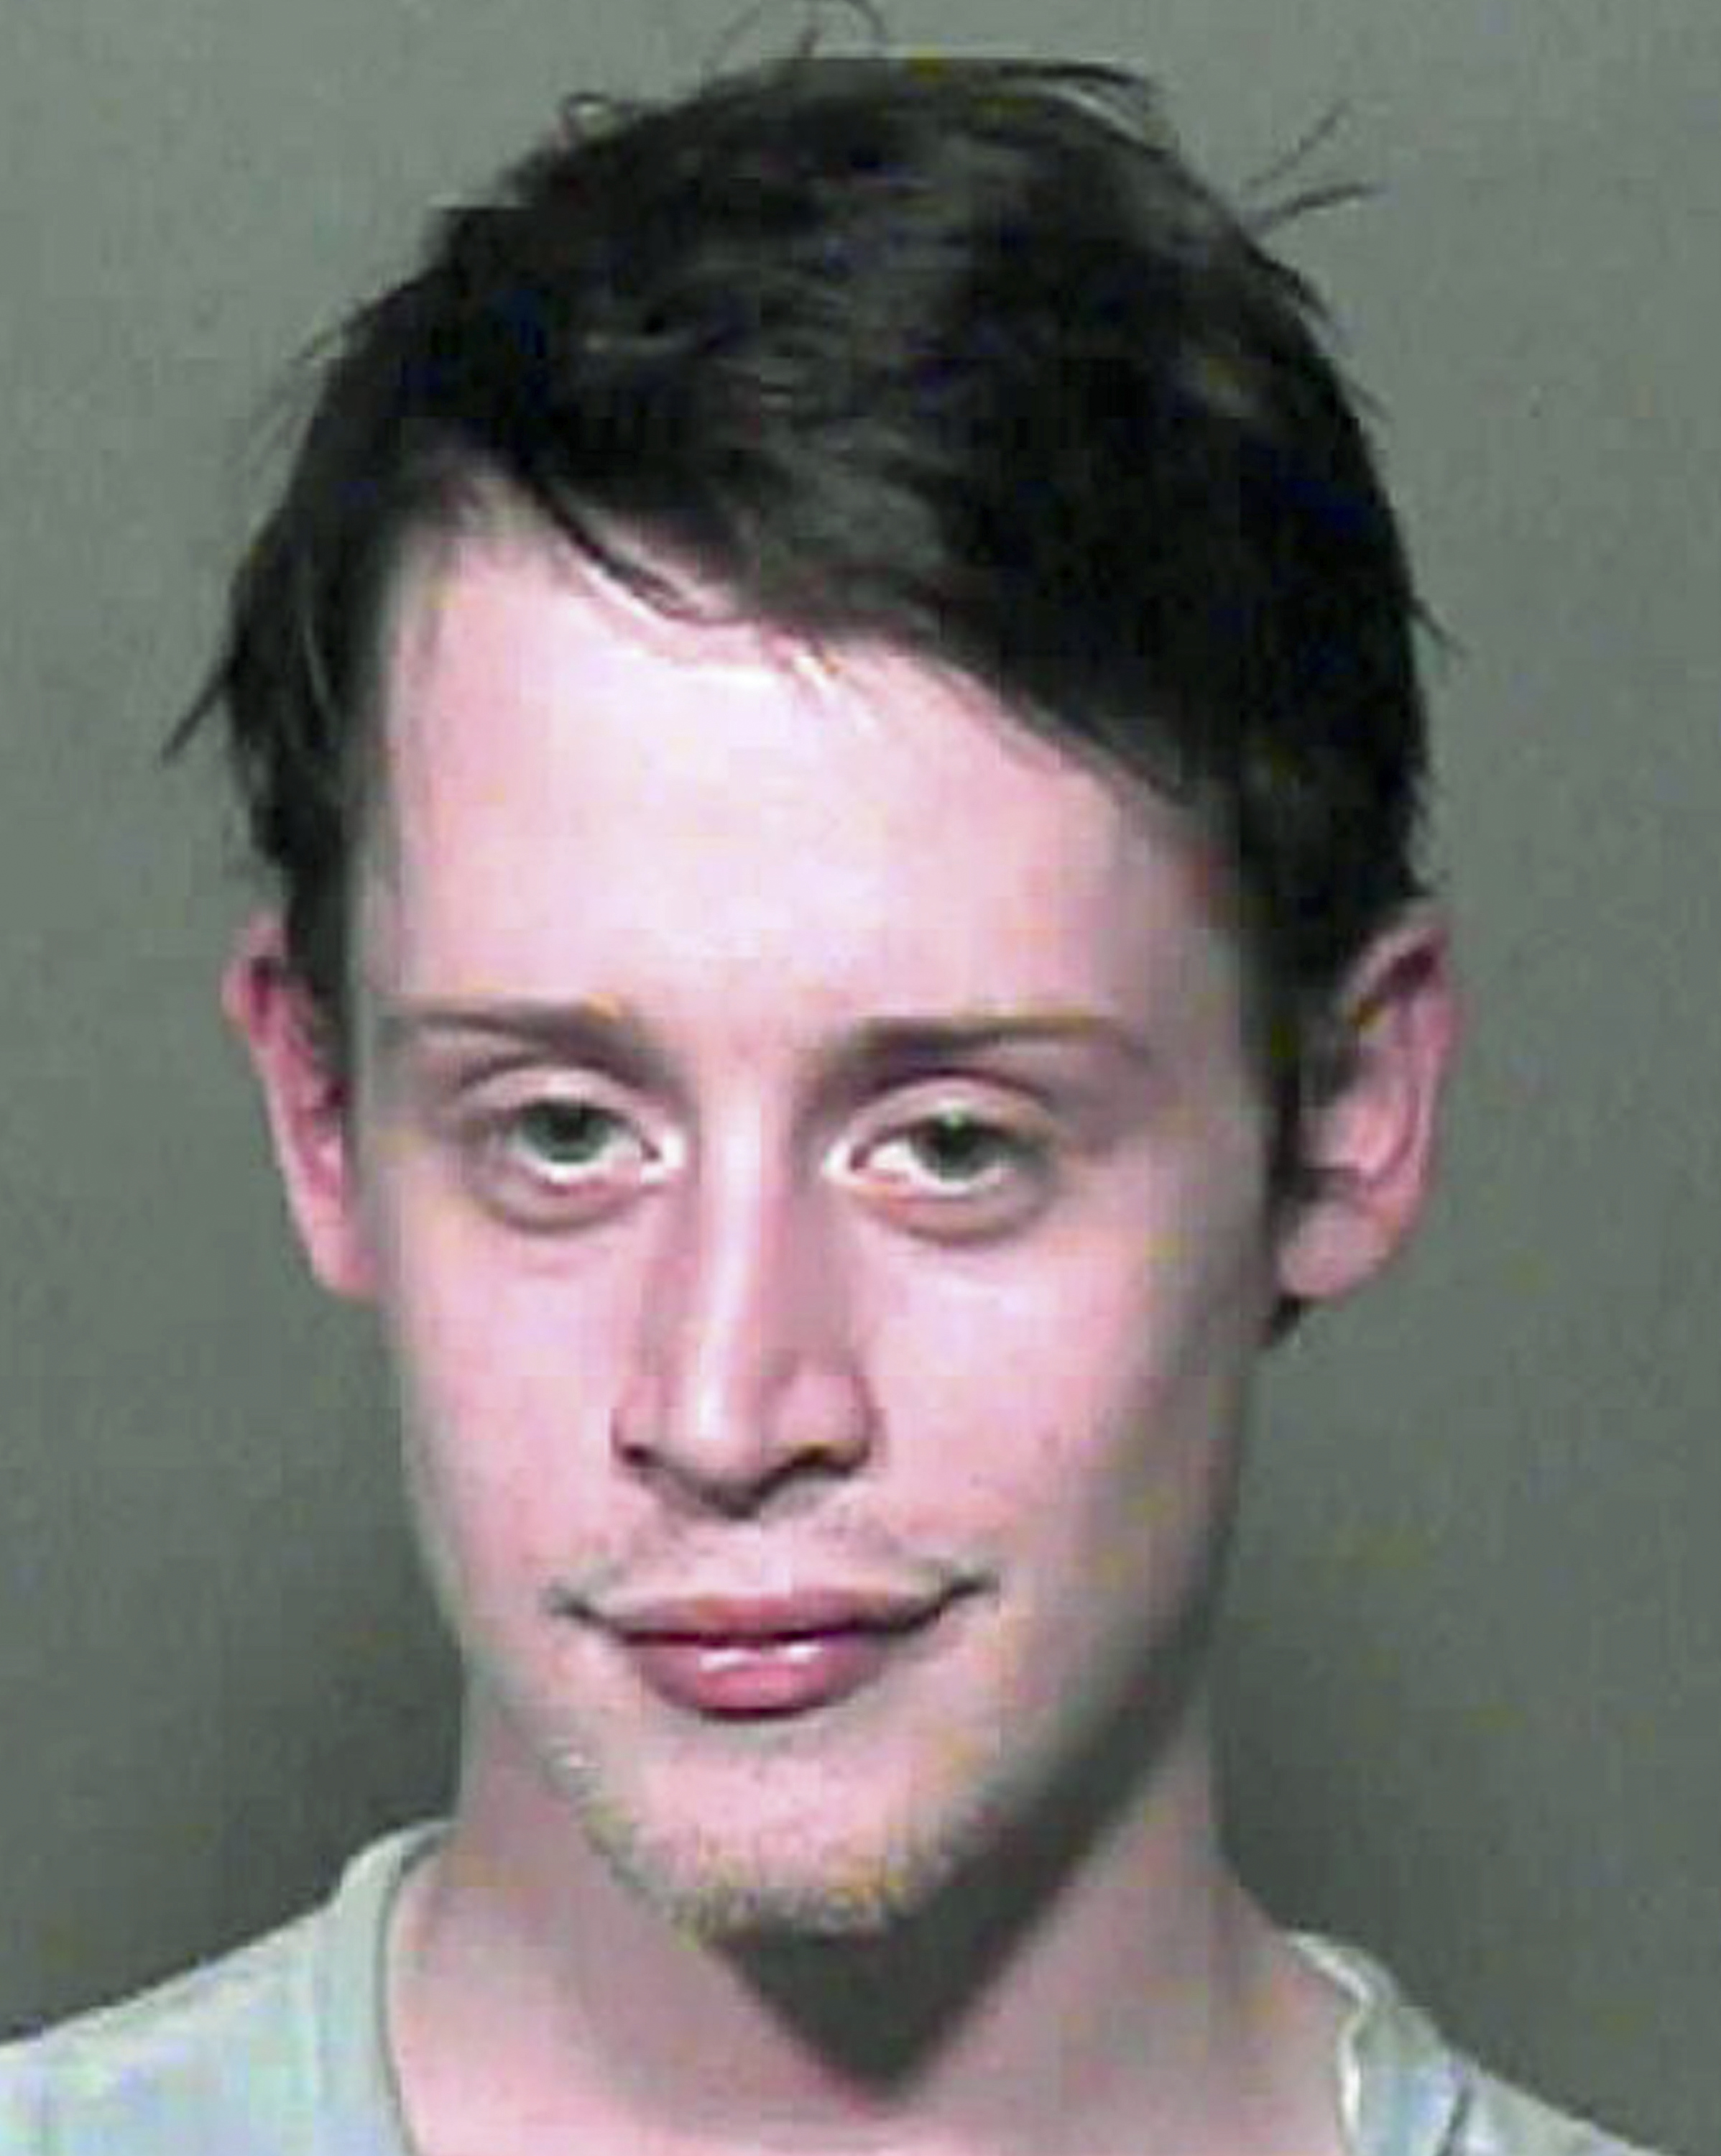 Macaulay Culkin's mugshot following his arrest in Oklahoma in September 17, 2004 | Source: Getty Images